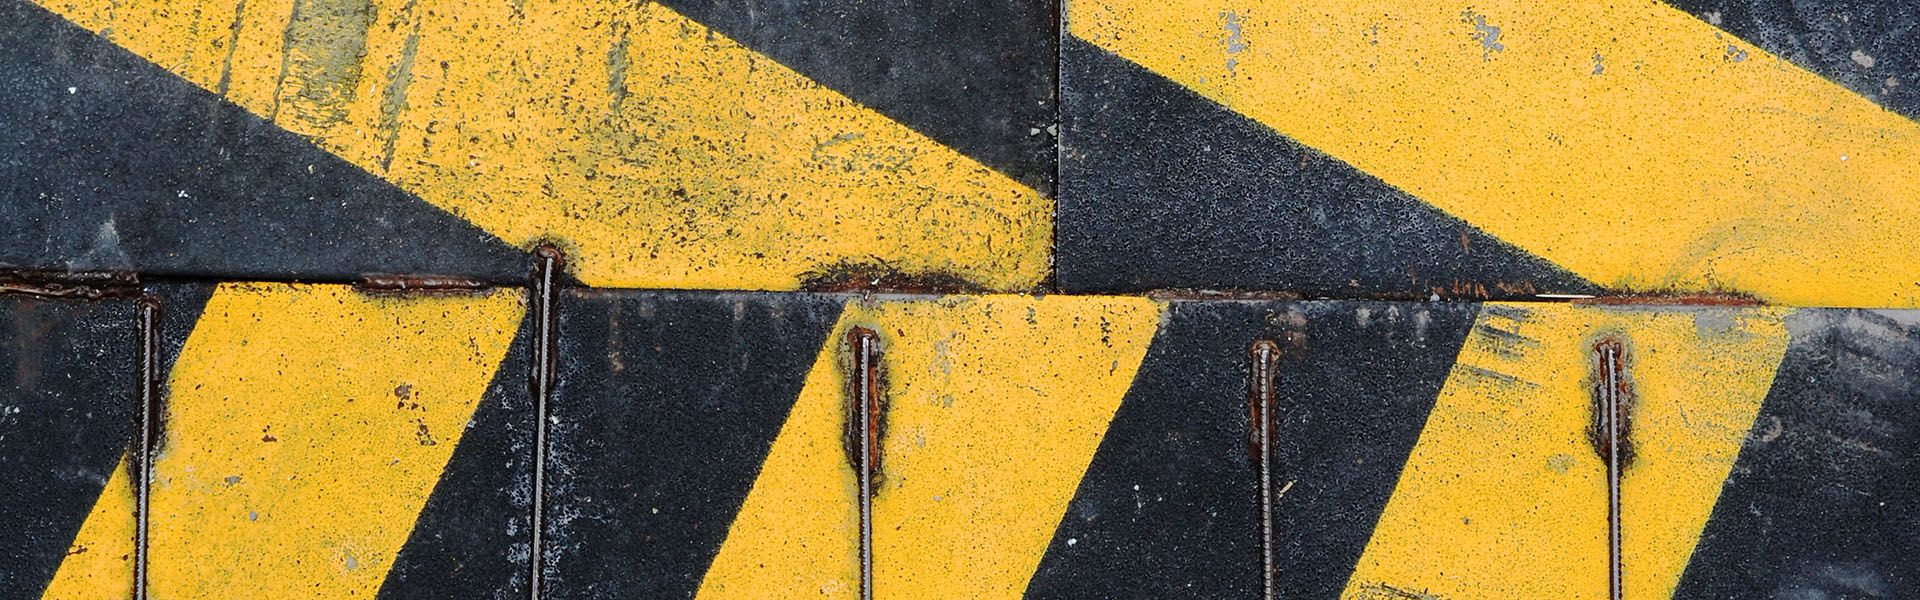 A  yellow and black painted road was built by a Georgia road construction company